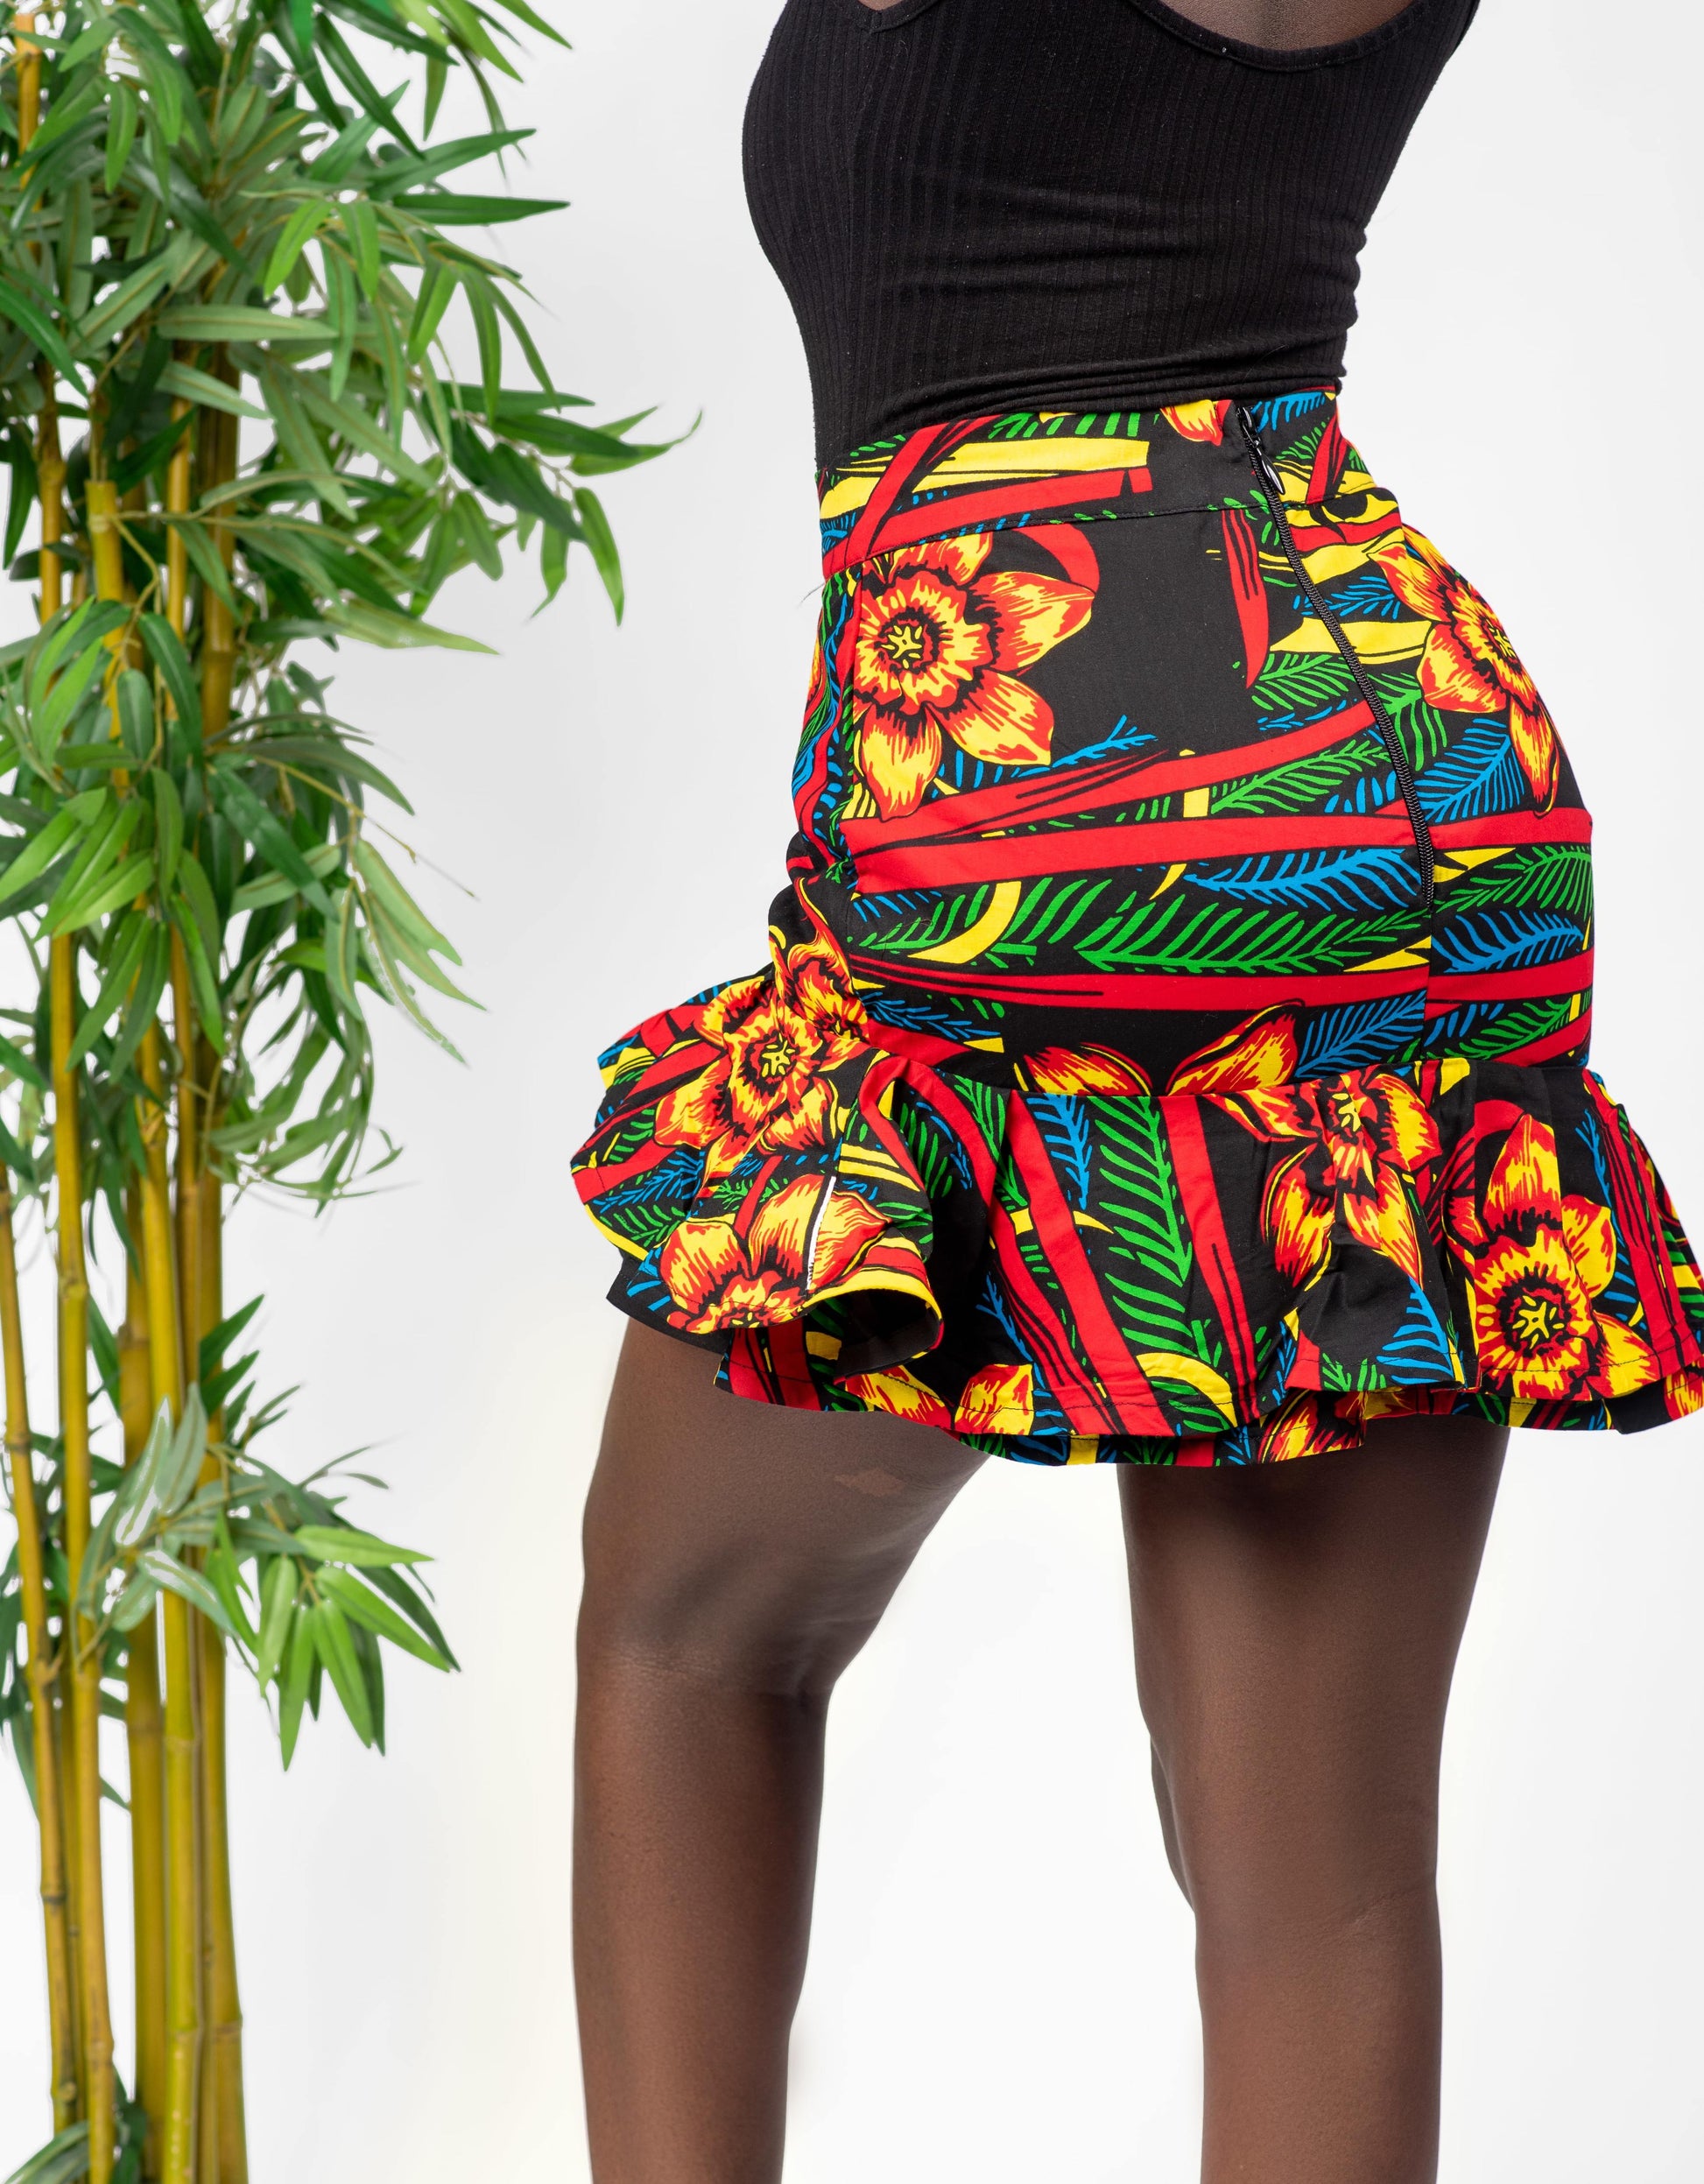 This African print skirt is Asymmetrical and features ruffles at the bottom. The asymmetrical hemline adds an element of interest, and the ruffles are fun and flirty. This skirt is perfect for women who want to stand out and be unique. Skirt is named after the Igbo ethnic group (from Nigeria) dance style; Atilogwu. Ankara skirt